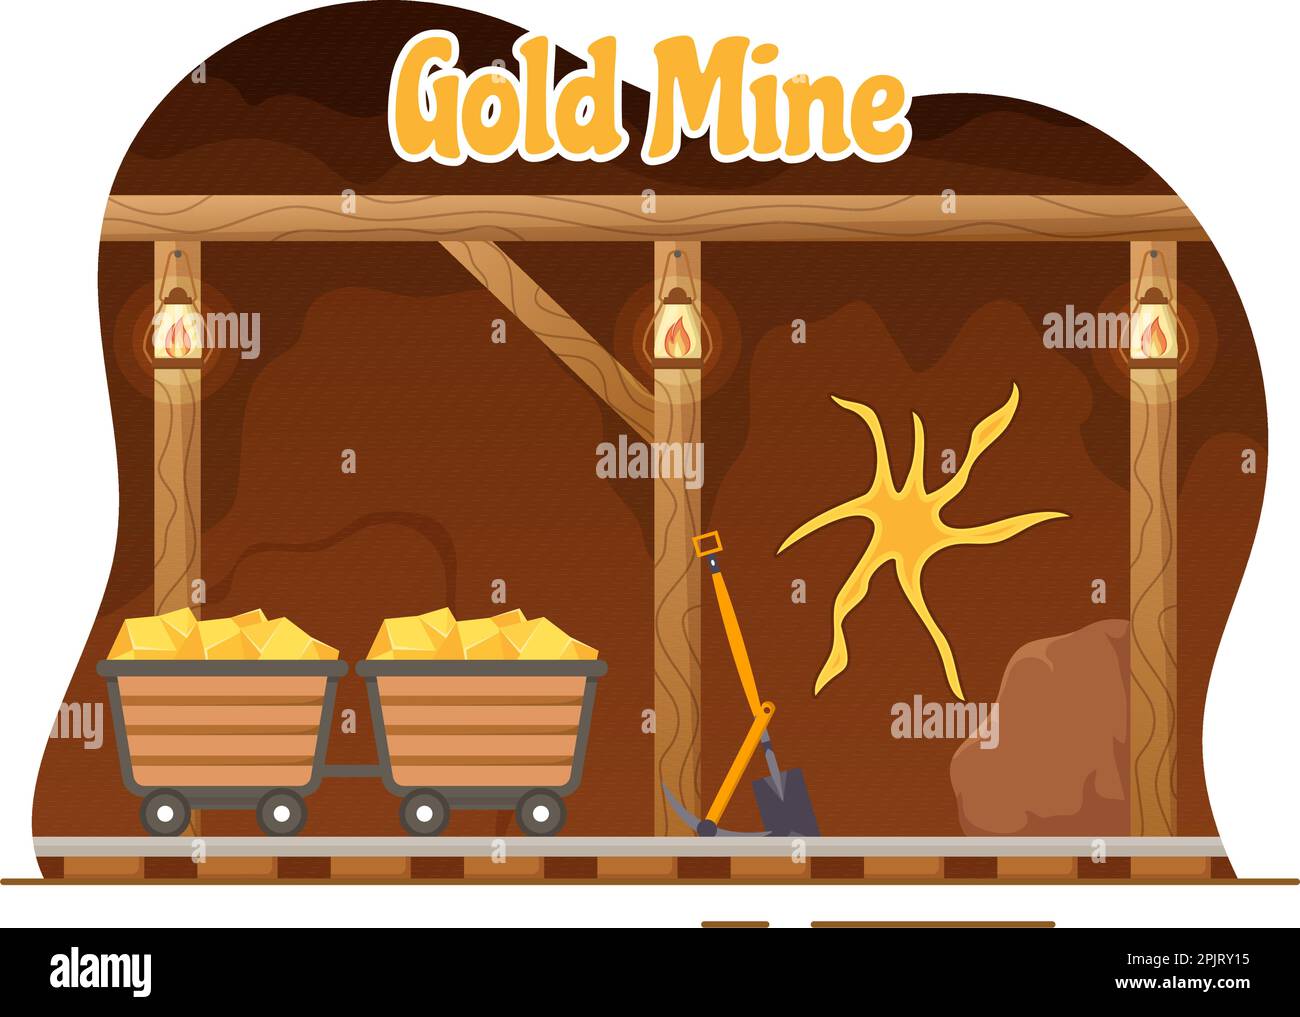 Gold Mine Illustration with Mining Industry Activity for Treasure, Pile of Coins, Jewelry and Gem in Flat Cartoon Hand Drawn Landing Page Templates Stock Vector